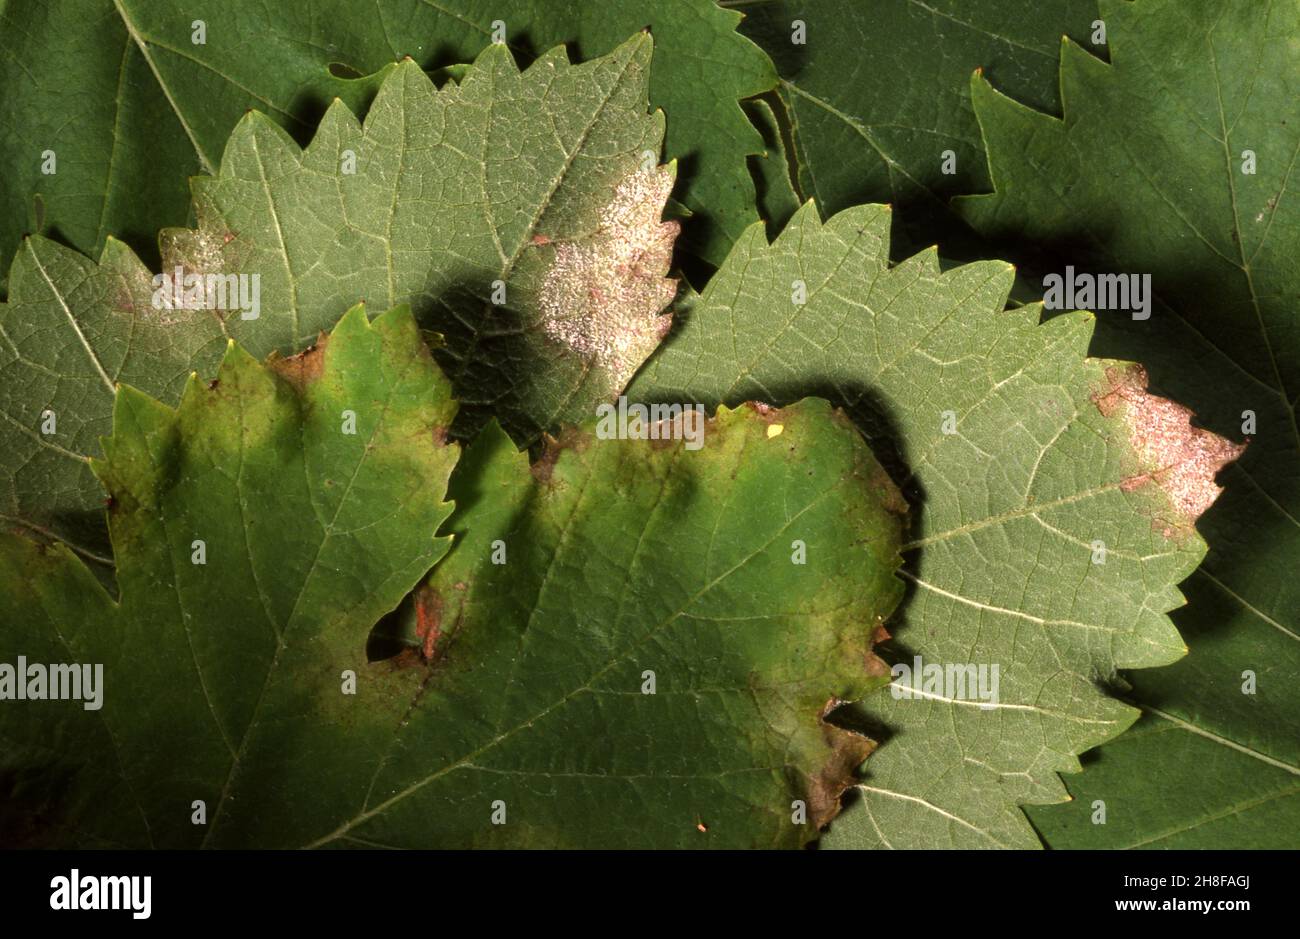 DOWNY MILDEW (PLASMOPARA VITICOLA) ON GRAPE VINE A FUNGAL DISEASE THAT IS WORSE IN HUMID CONDITIONS. Stock Photo